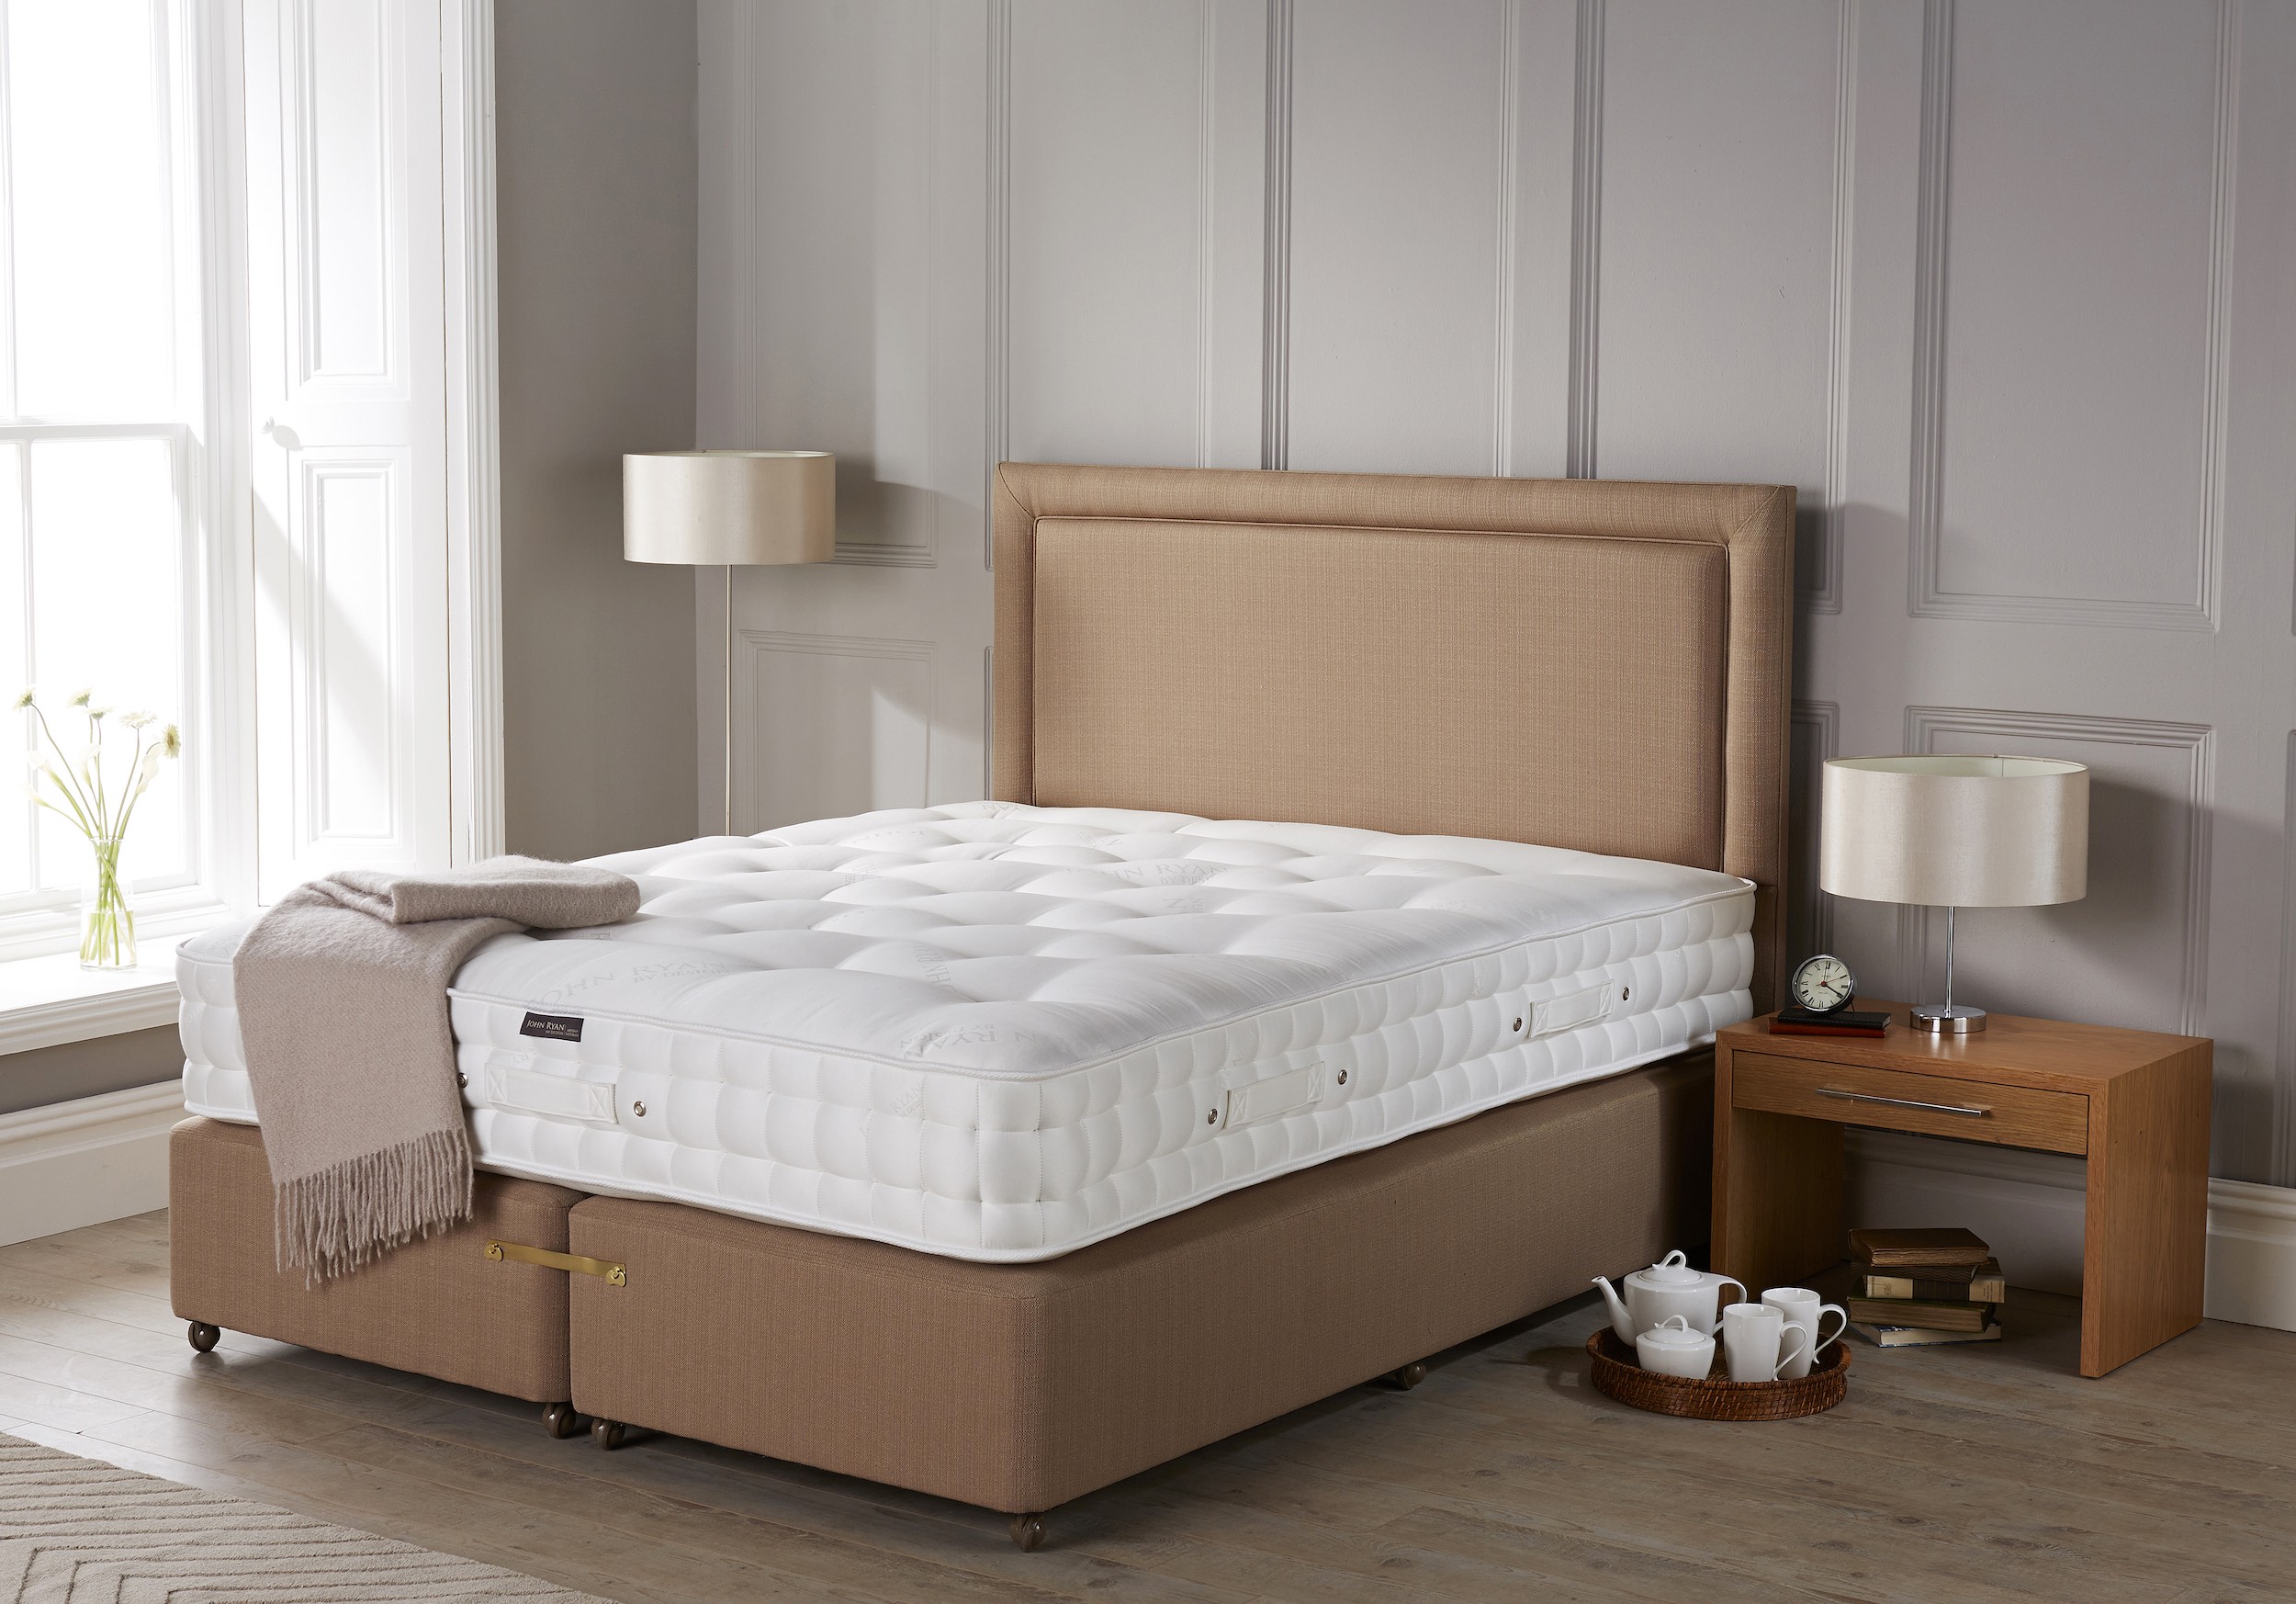 Zip And Links Beds Mattresses, King Size Bed With 2 Separate Mattresses